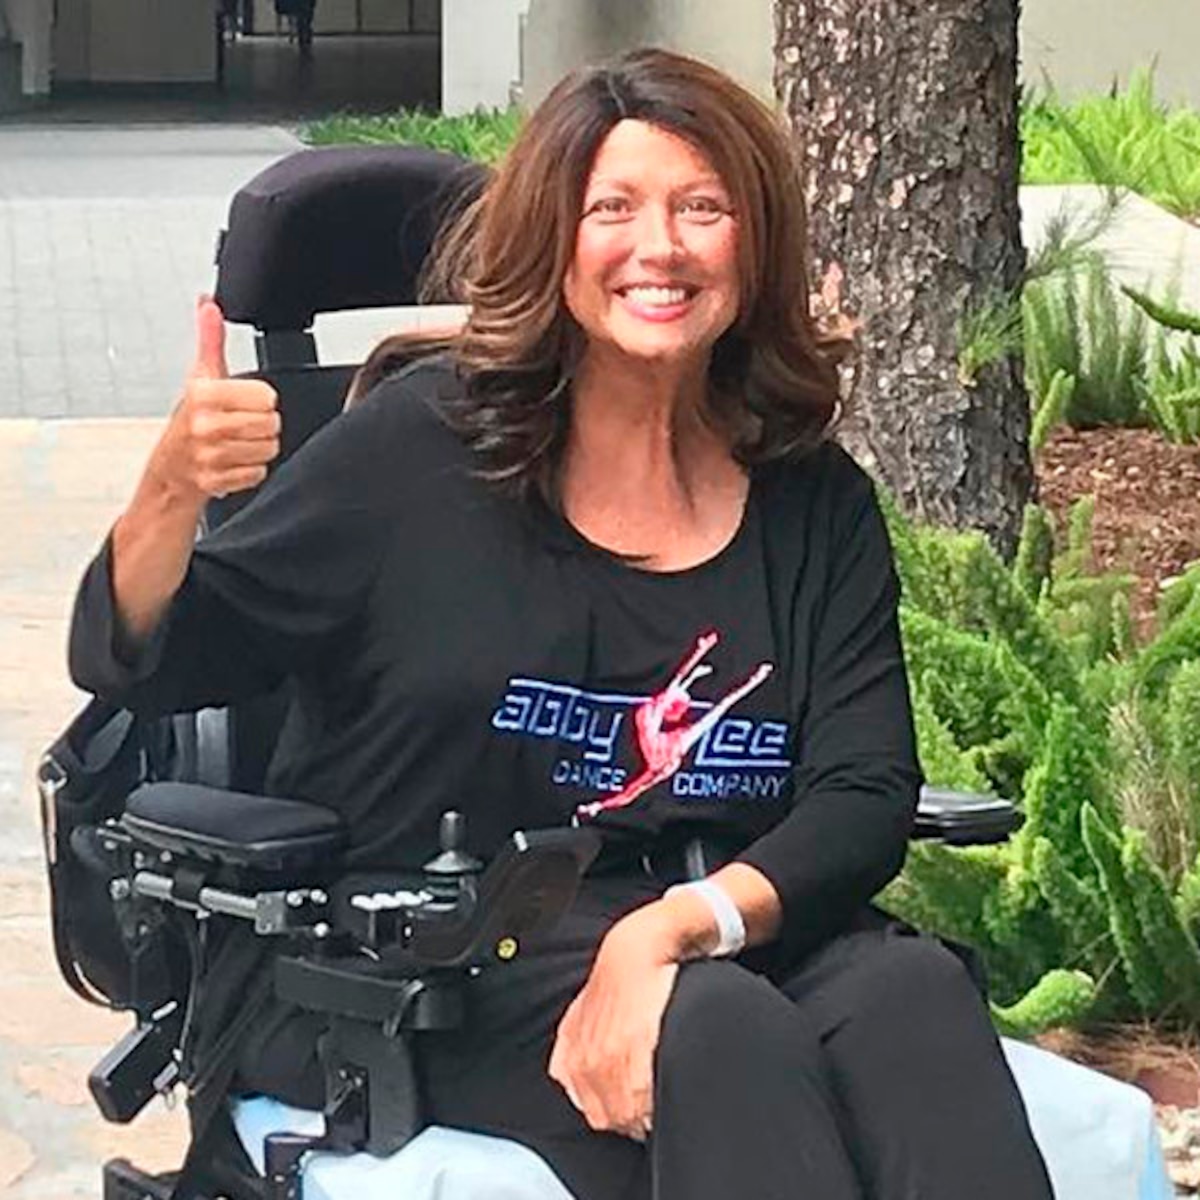 What's Next in Abby Lee Miller's Health Journey - E! Online